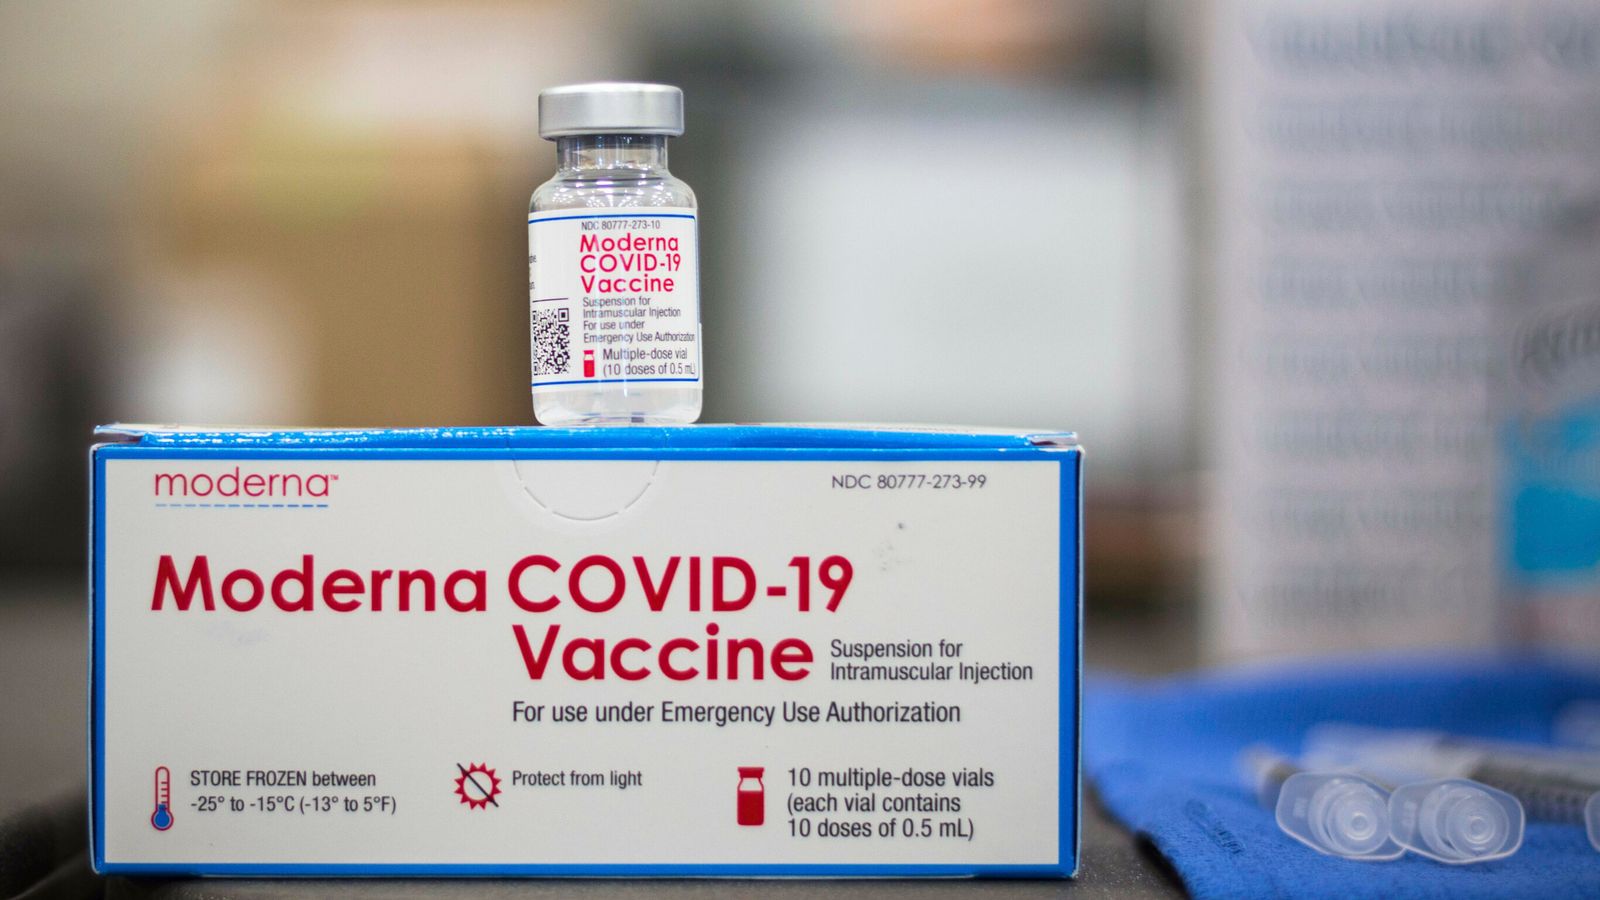 COVID-19: New type of vaccine given to patients in UK for the first time today British news